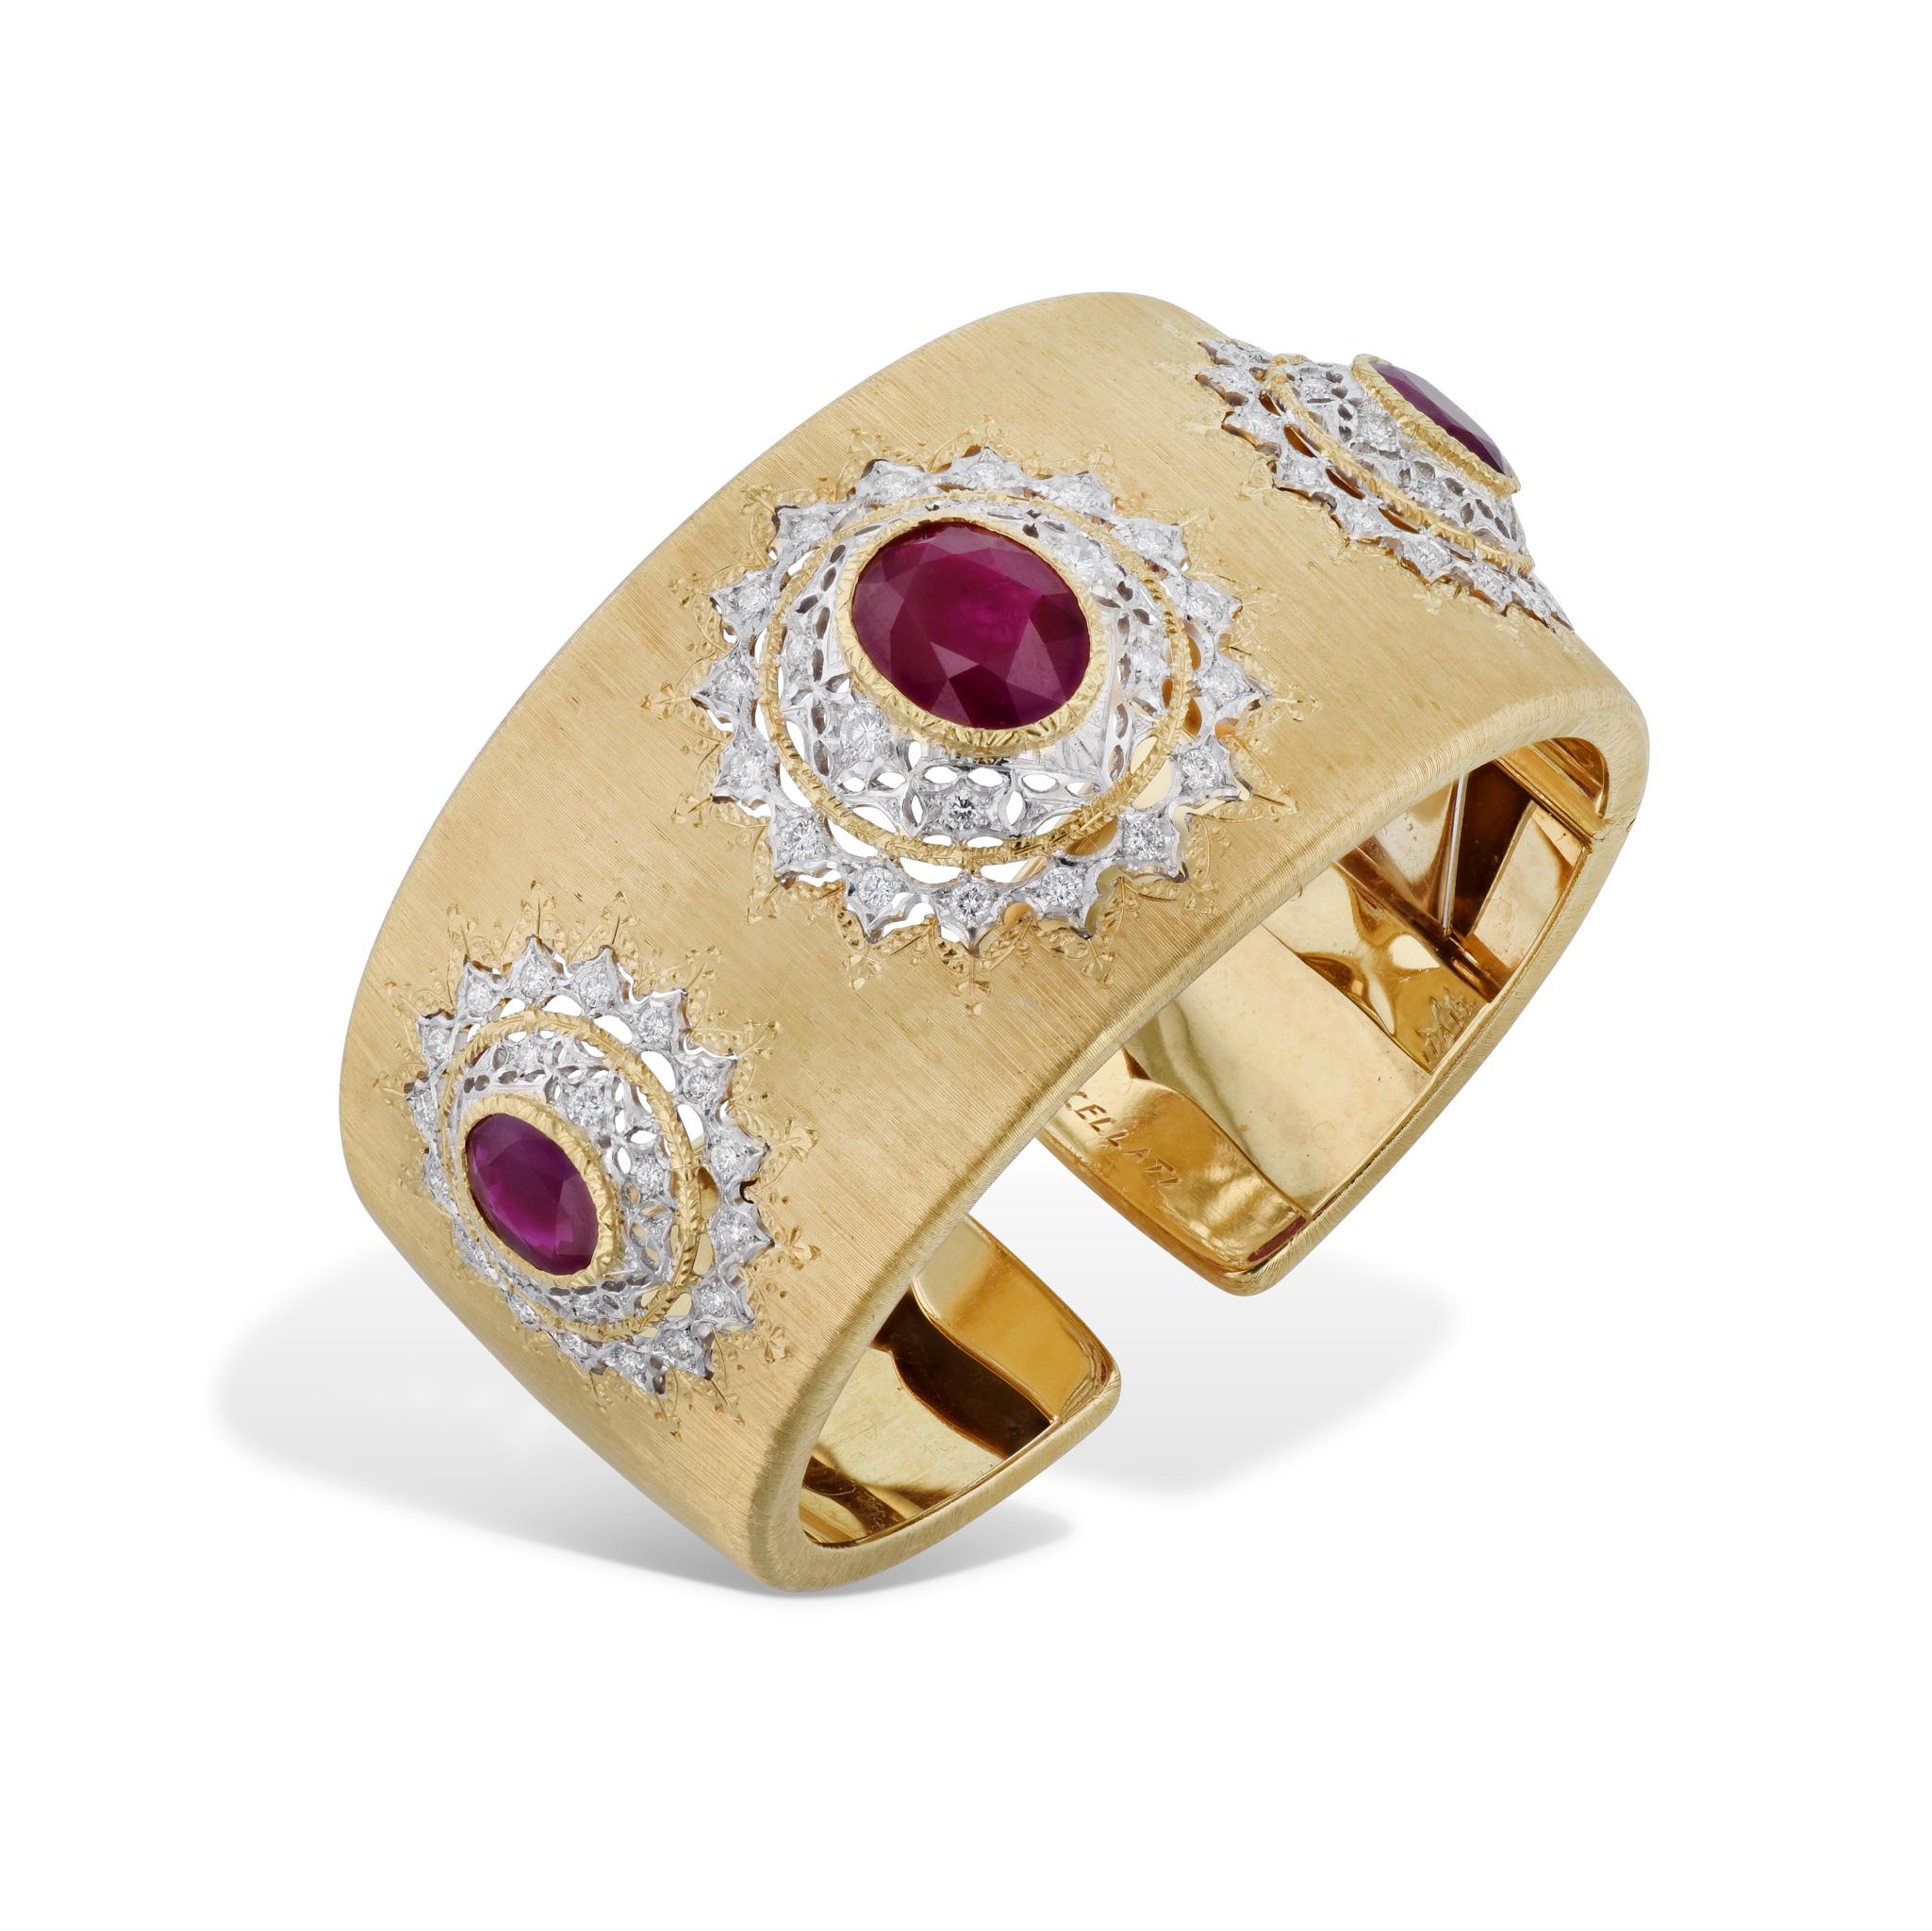 This is one of the most stunning bracelets you will ever see!
This is a handmade original Buccellati cuff bracelet with original box.

There are a total of approximately 9.5 carats of Burmese Rubies in this 18 karat yellow and white gold cuff